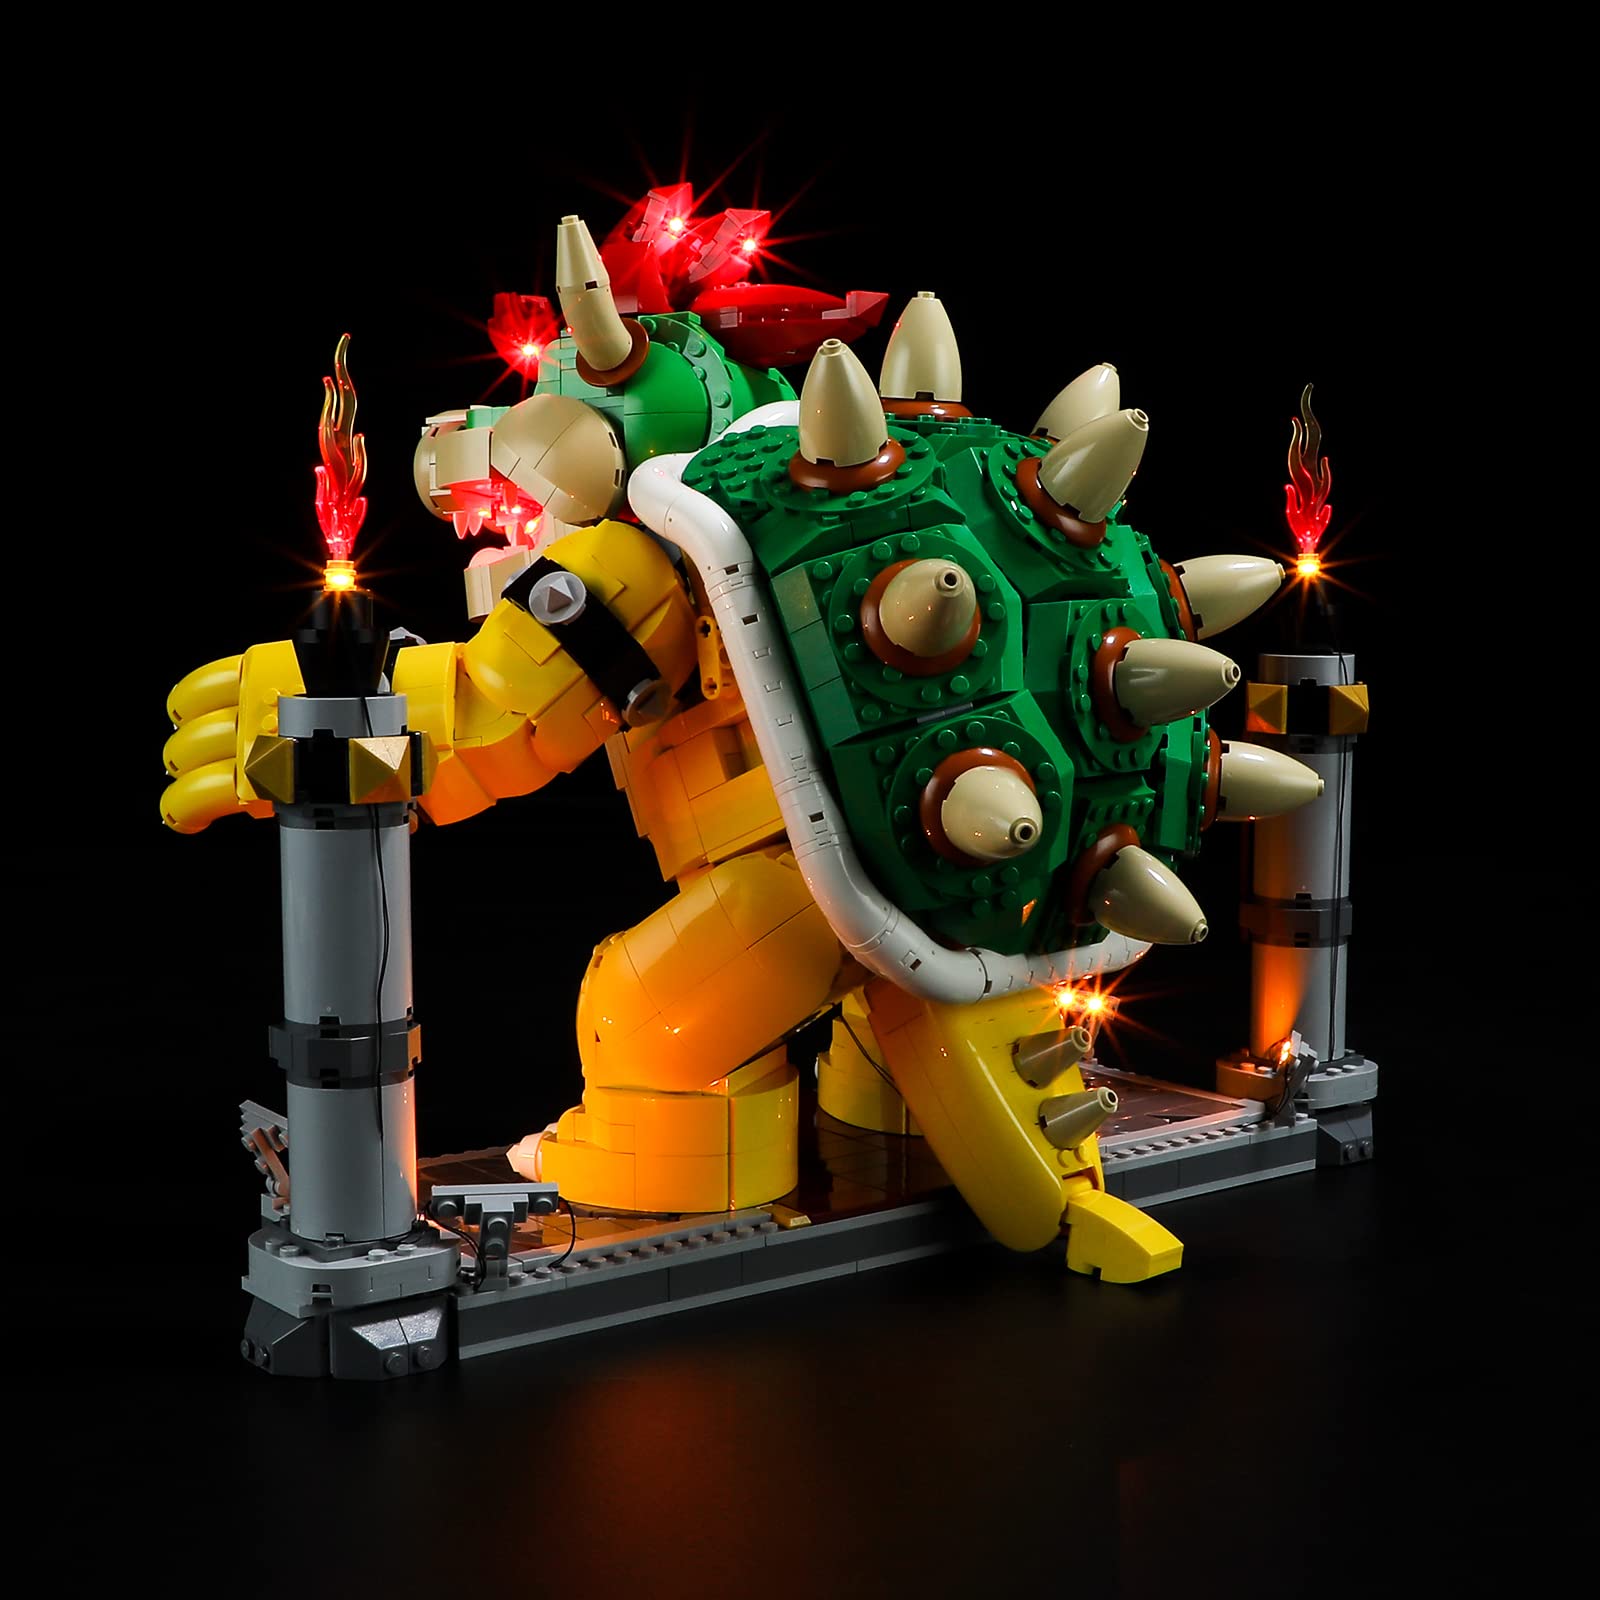 LIGHTAILING Light for Lego-71411 The Mighty-Bowser - Led Lighting Kit Compatible with Lego Building Blocks Model - NOT Included The Model Set